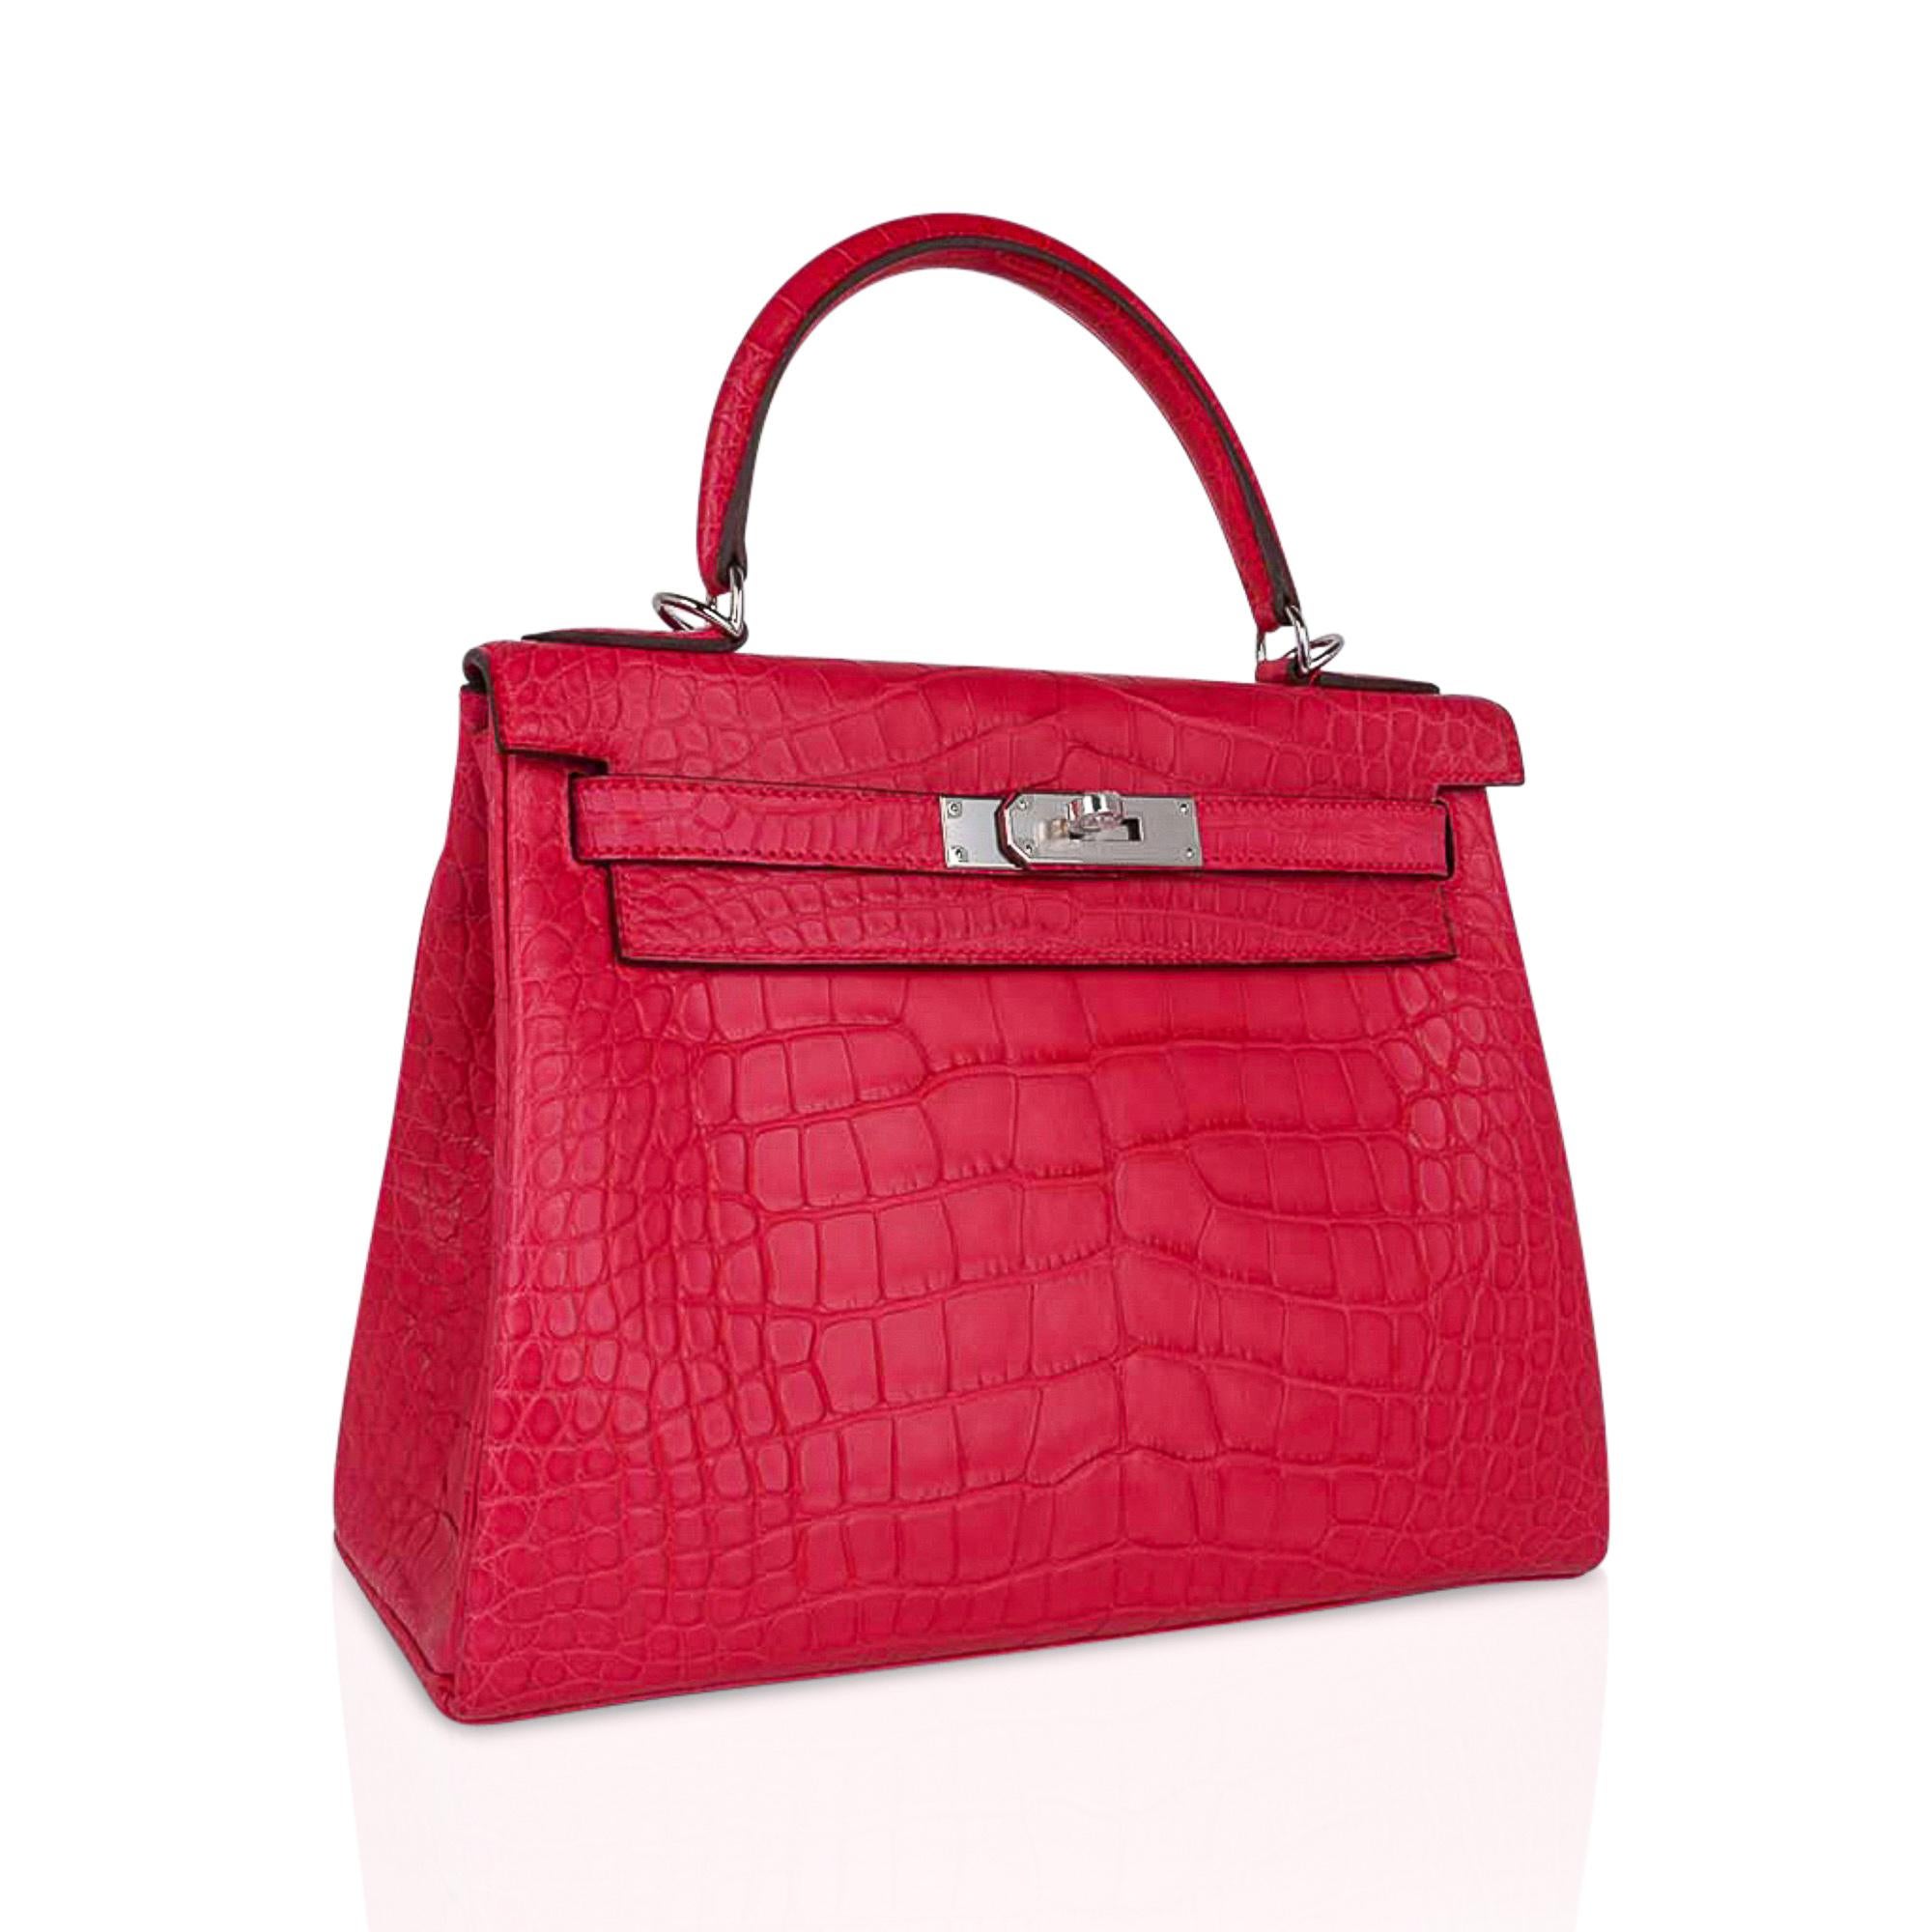 Mightychic offers an Hermes Kelly 28 bag featured in rich jewel toned Rose Extreme matte alligator.
This iconic vibrant pink Hermes bag is timeless and chic.
Fresh with palladium hardware.
This gorgeous Hermes Kelly bag is a perfect year round